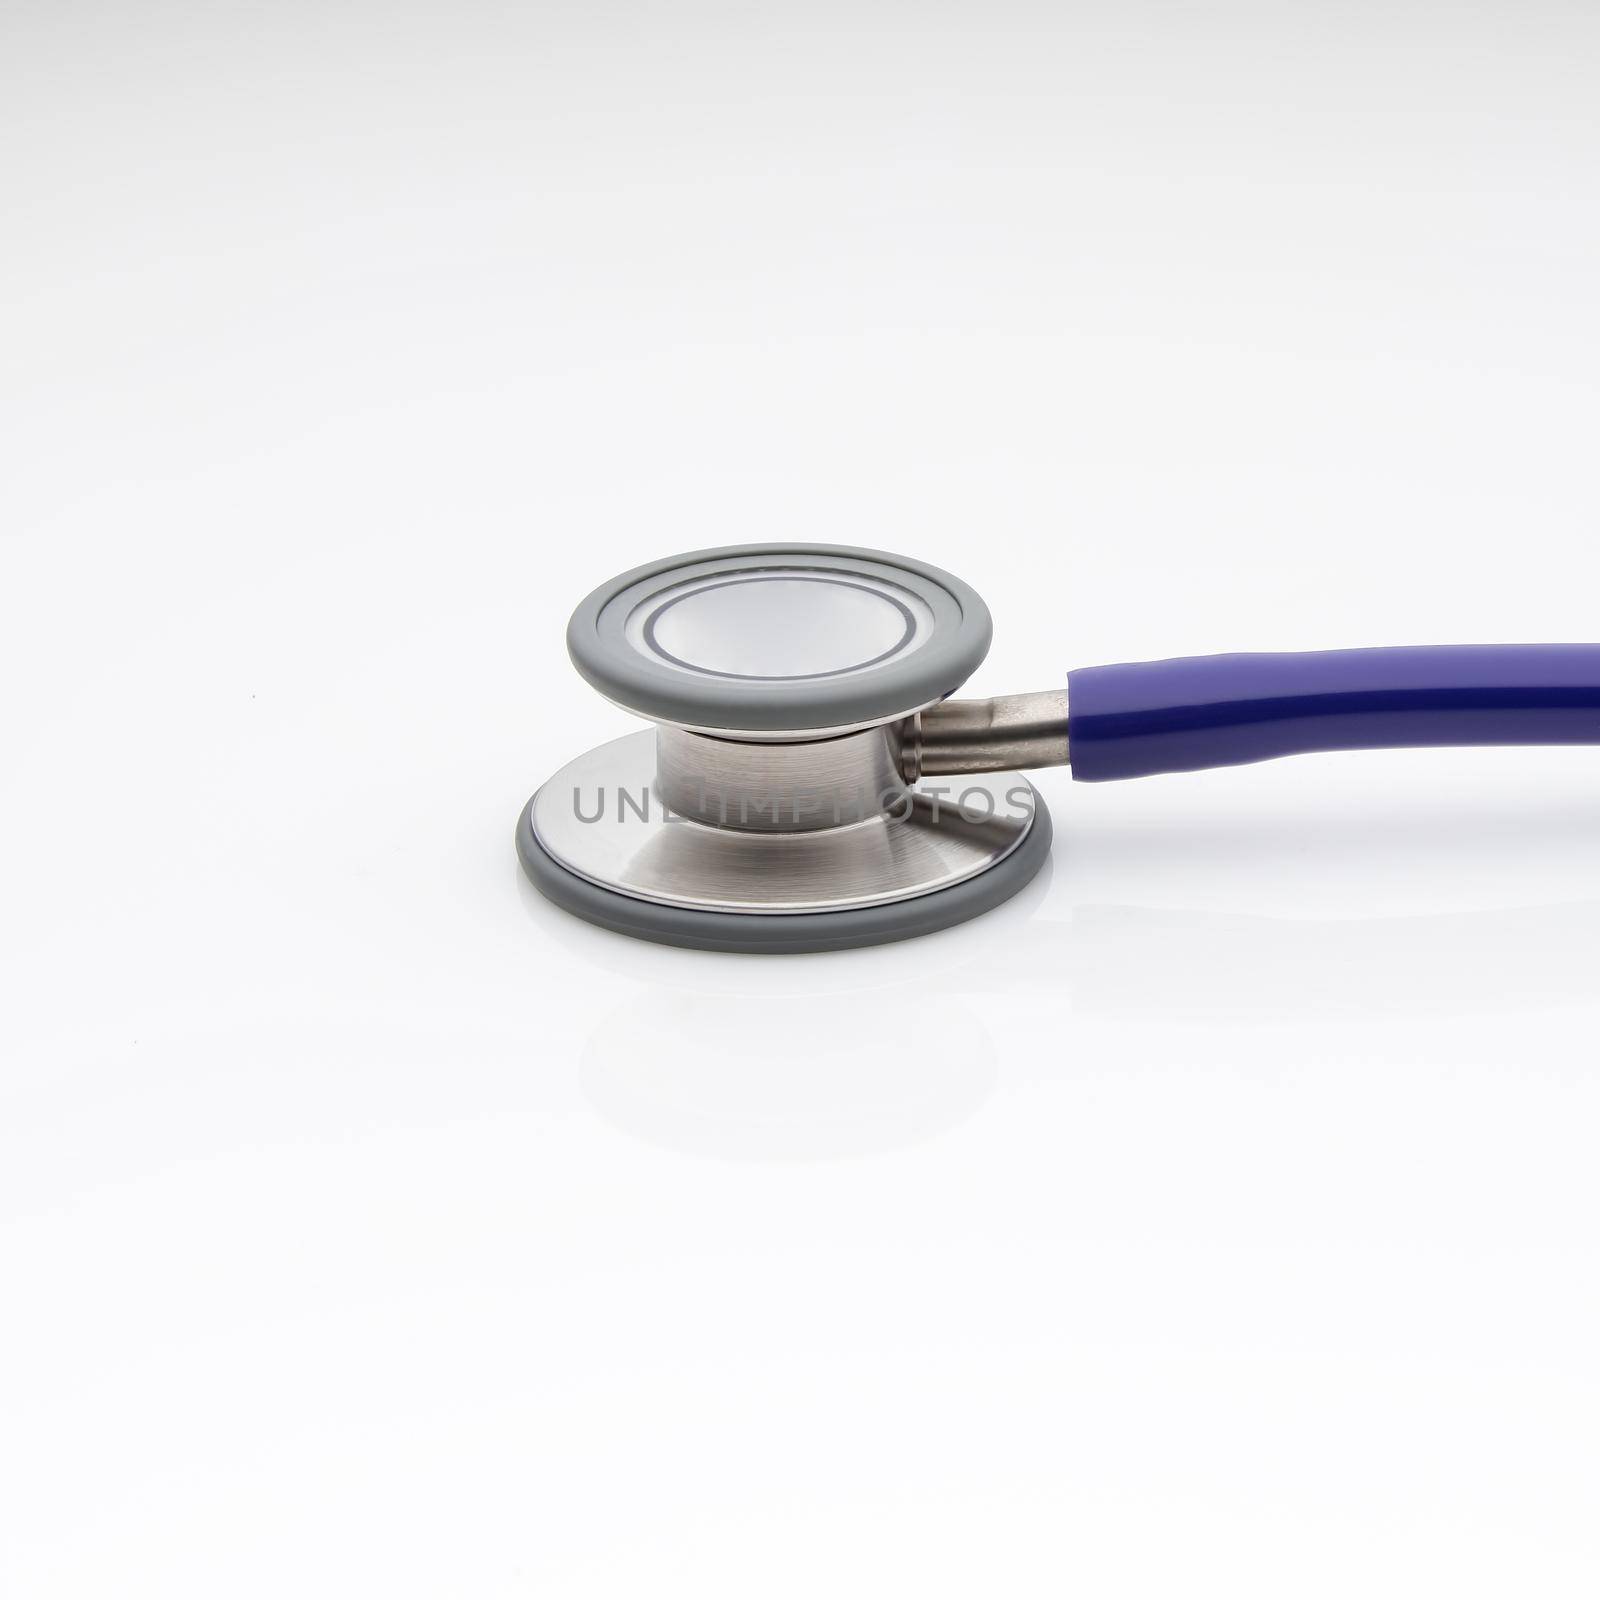 Diaphragm of medical stethoscope isolated on a white background by A_Karim